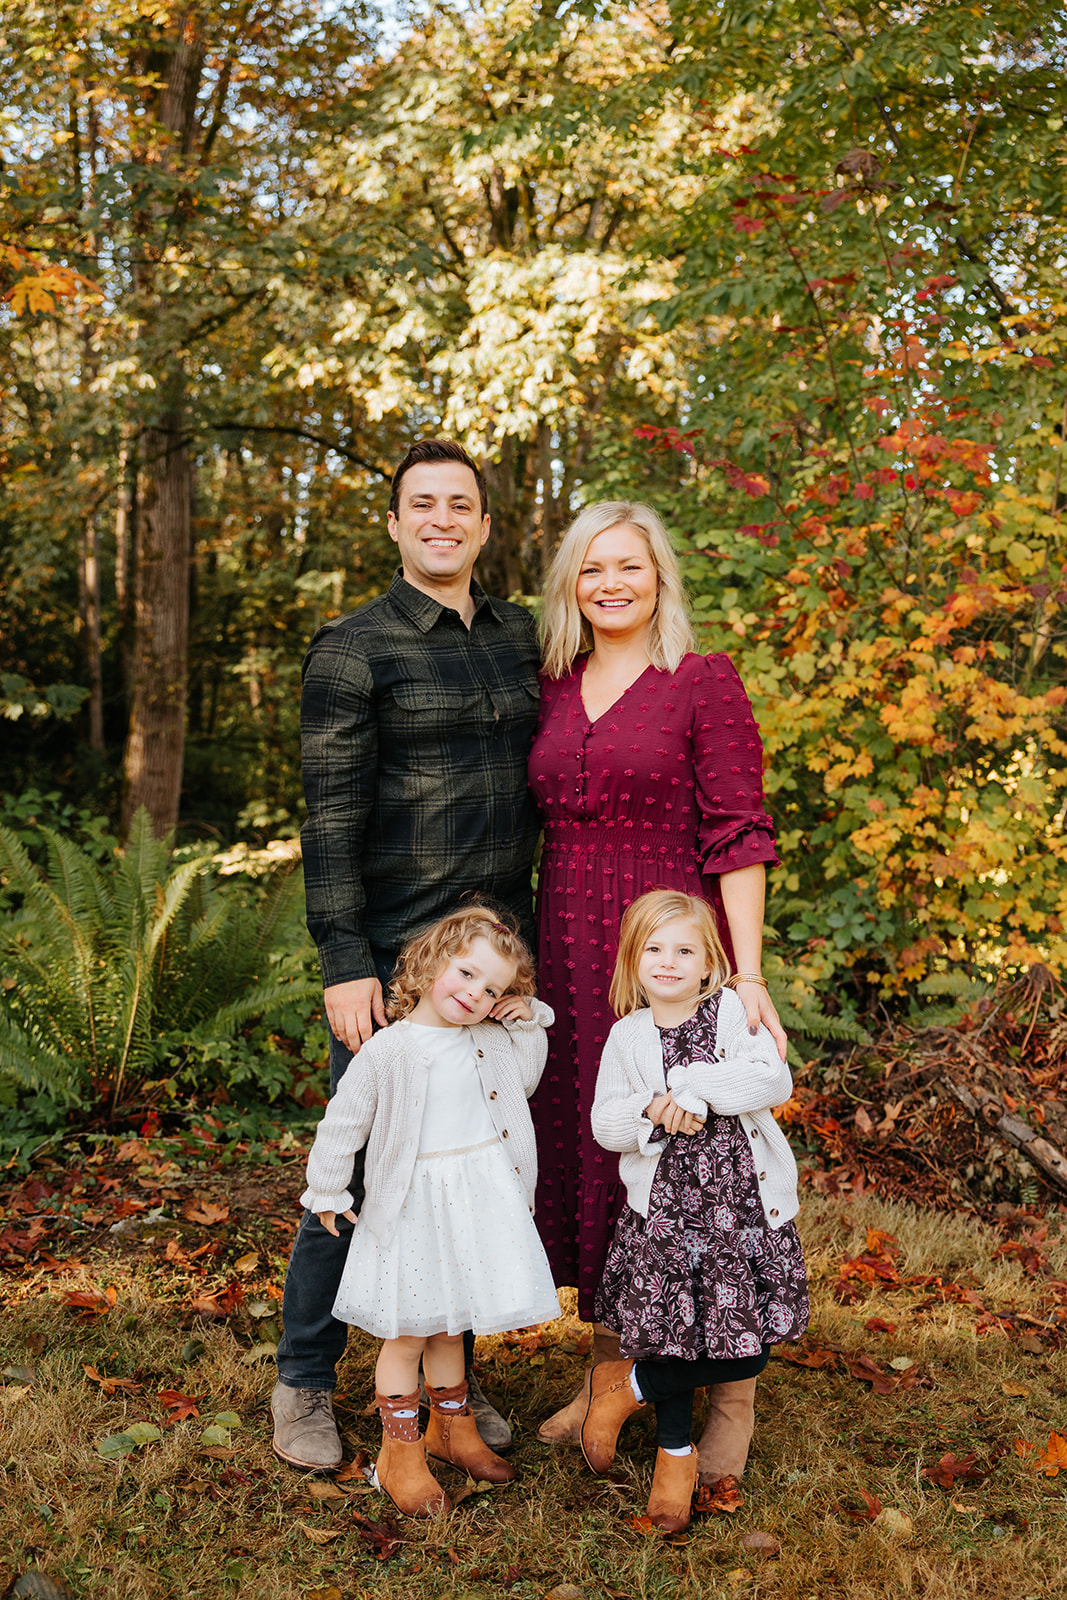 A photo of a happy family hugging each other and smiling at the camera in front of colorful fall foliage.